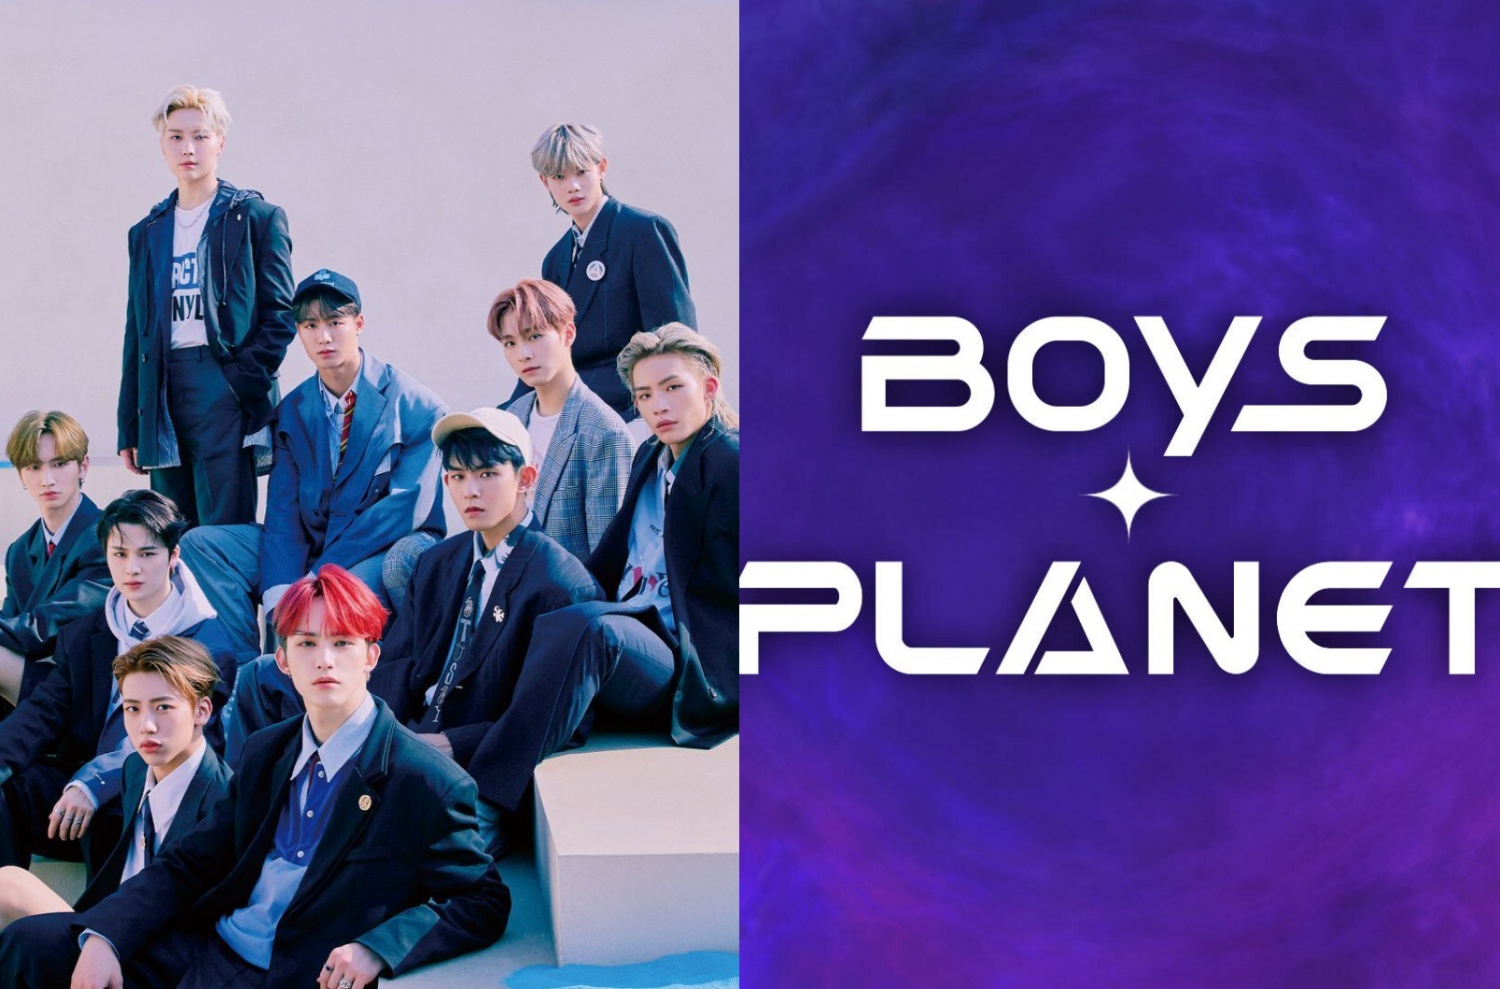 2 former TO1 members are reportedly attending Mnet’s “Boys Planet” as contestants